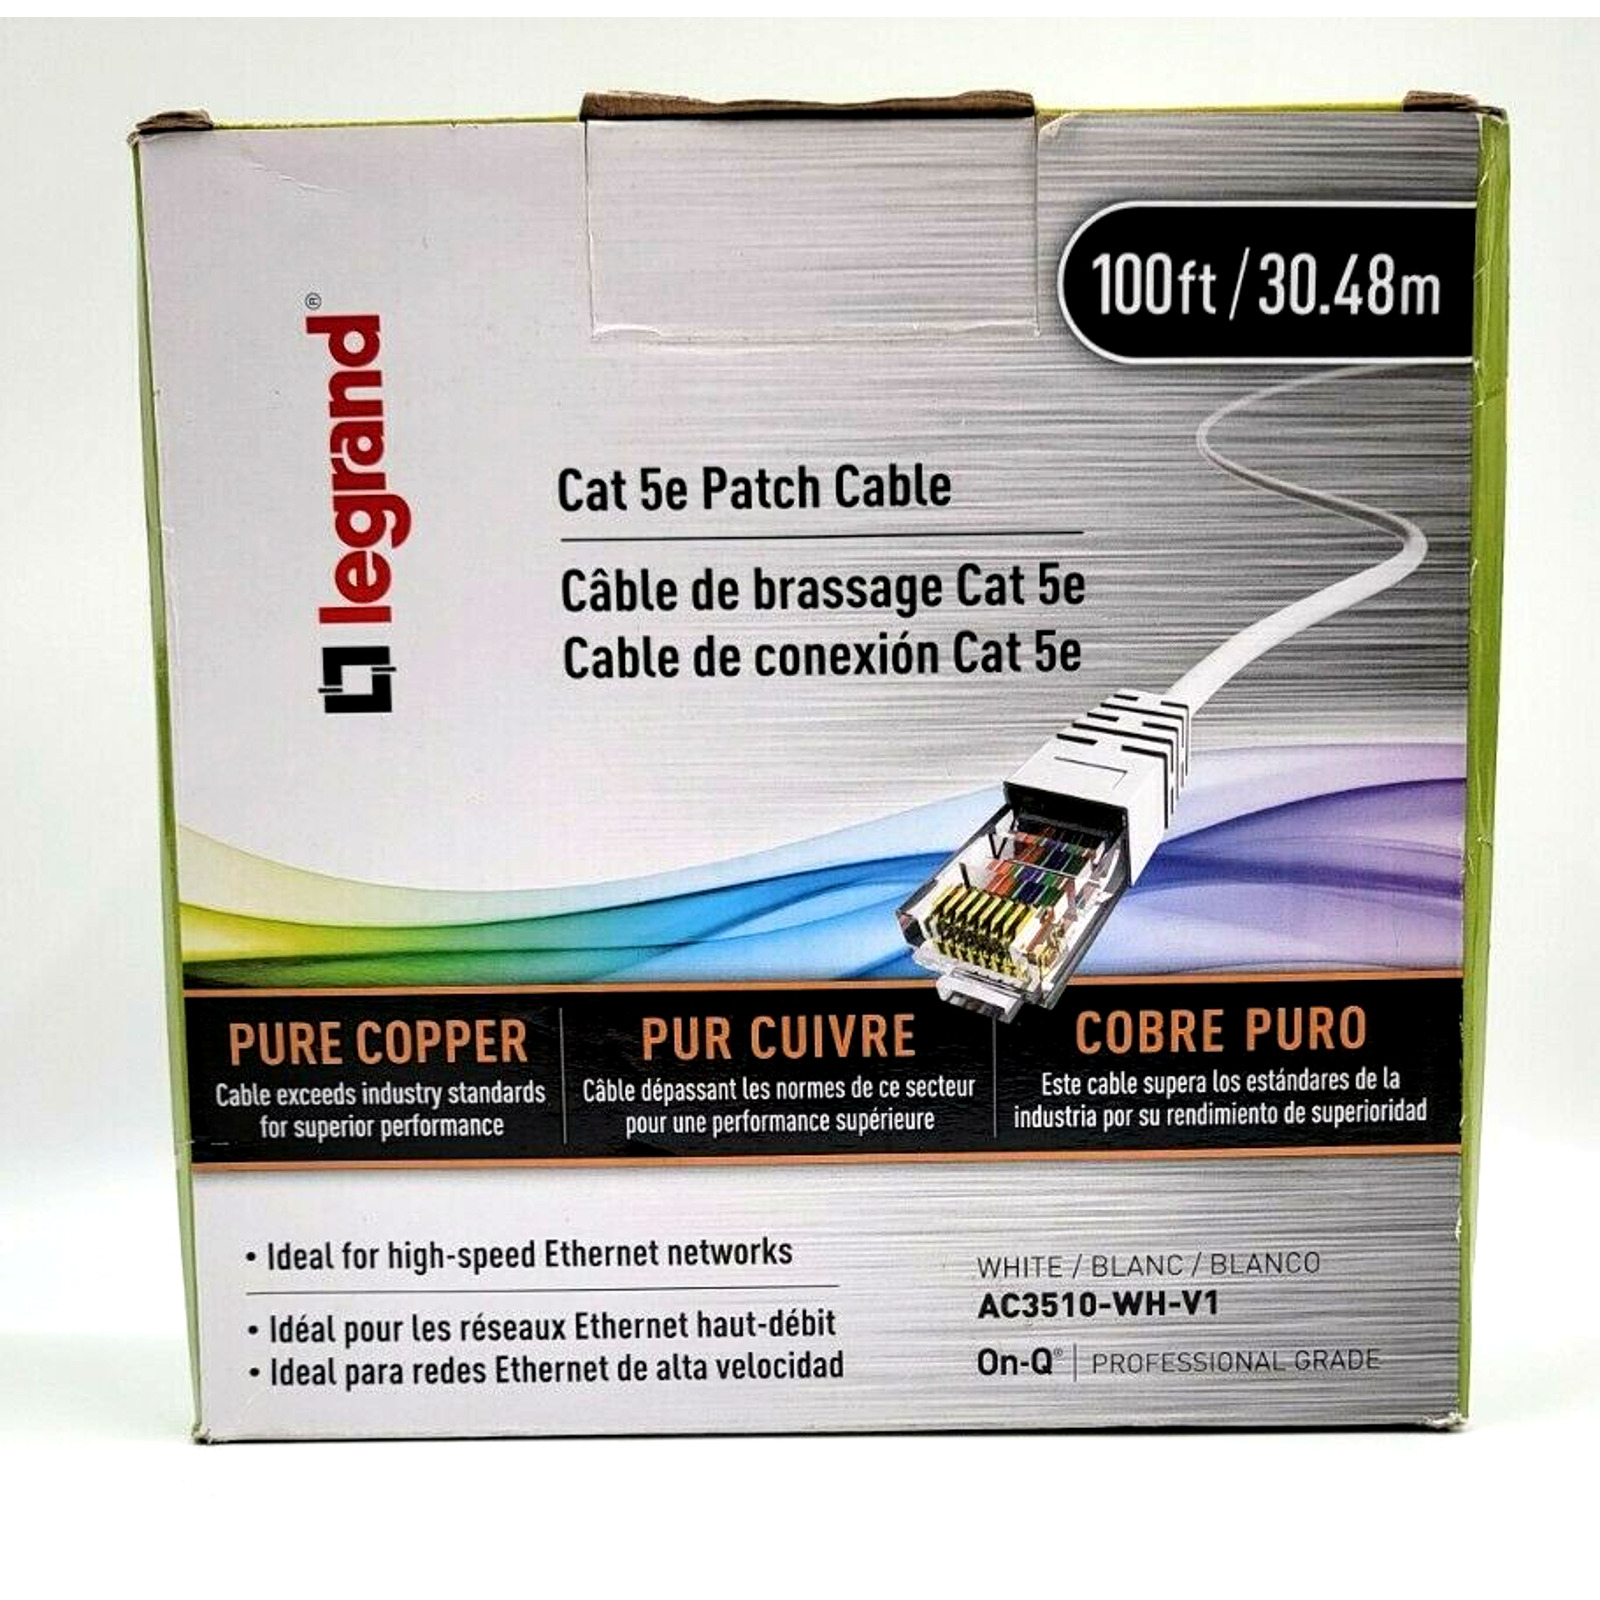 Legrand CAT 5e Patch Cable Wire Computer Network Data Cable 100 ft. Pure Copper